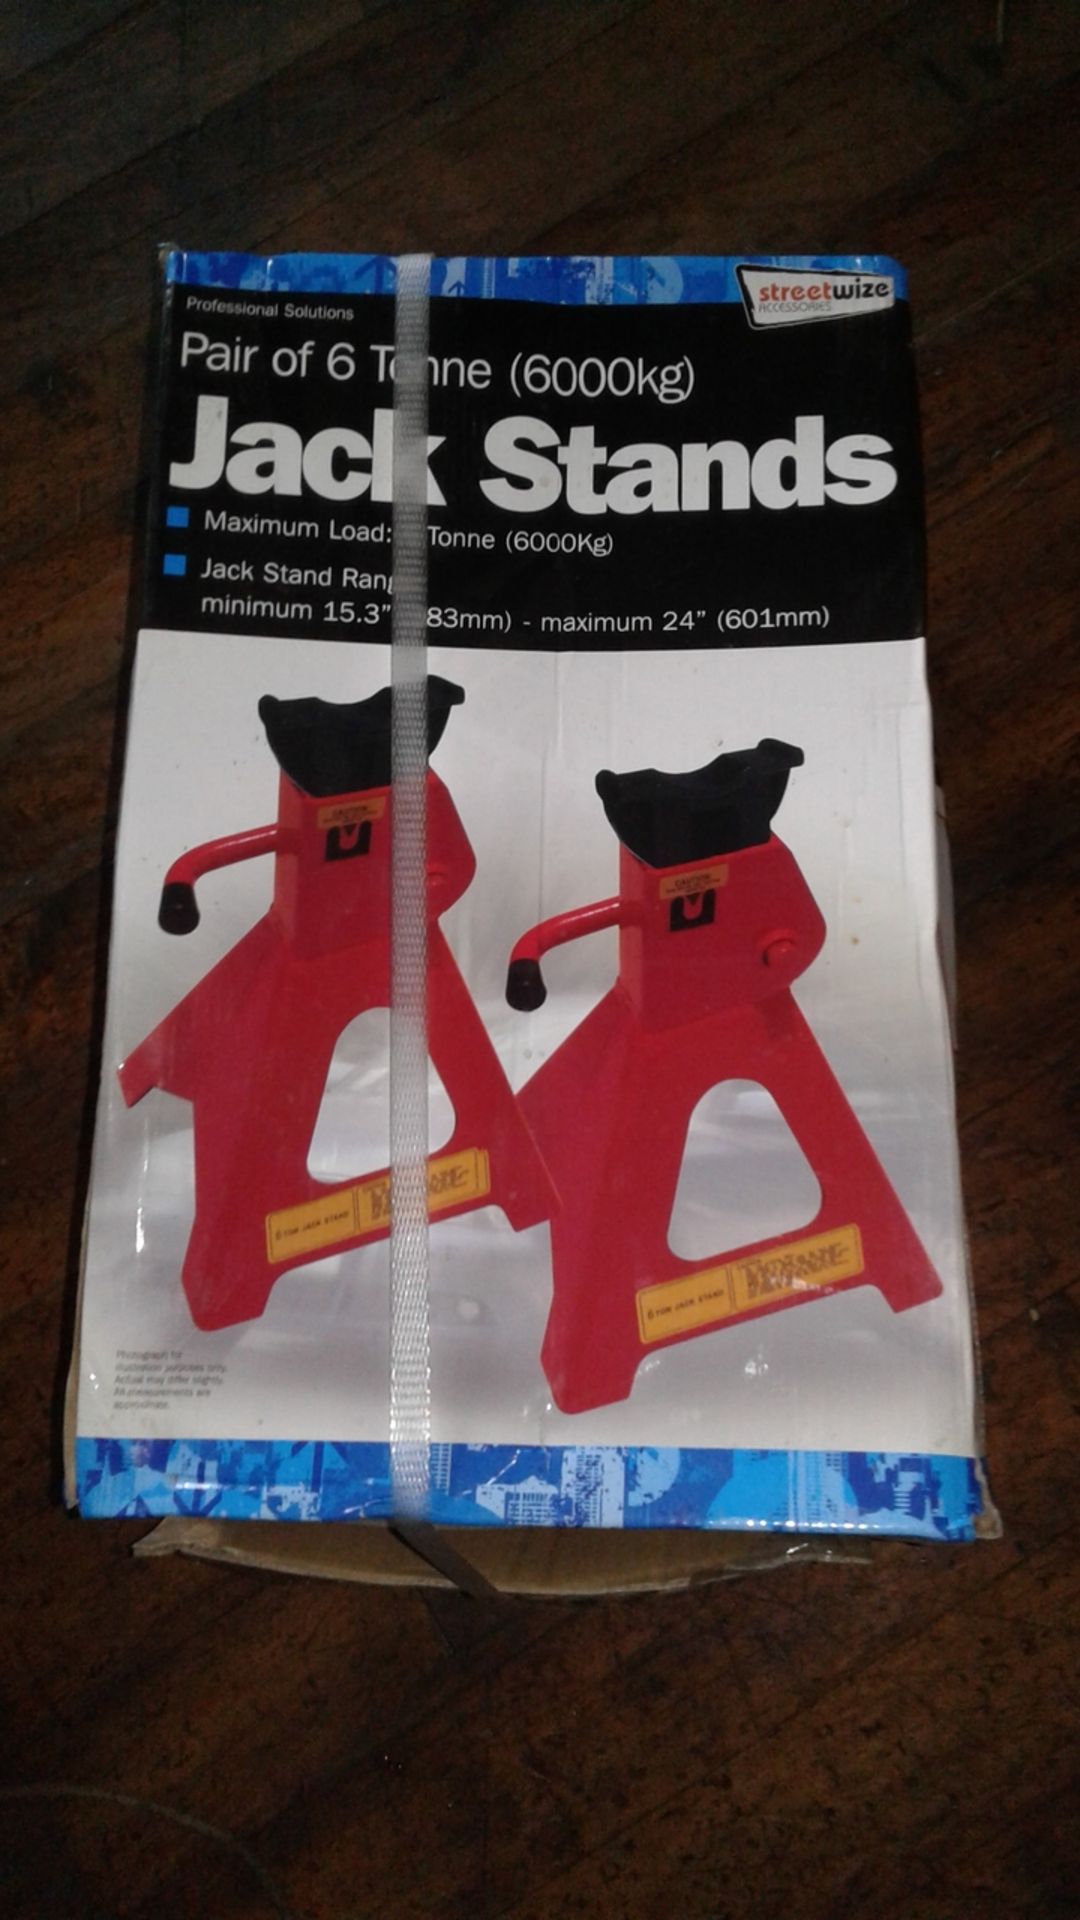 Pair of 6 tonne Axle jack stands - new unused heavy duty - damage box - items brand new rrp £49.99 a